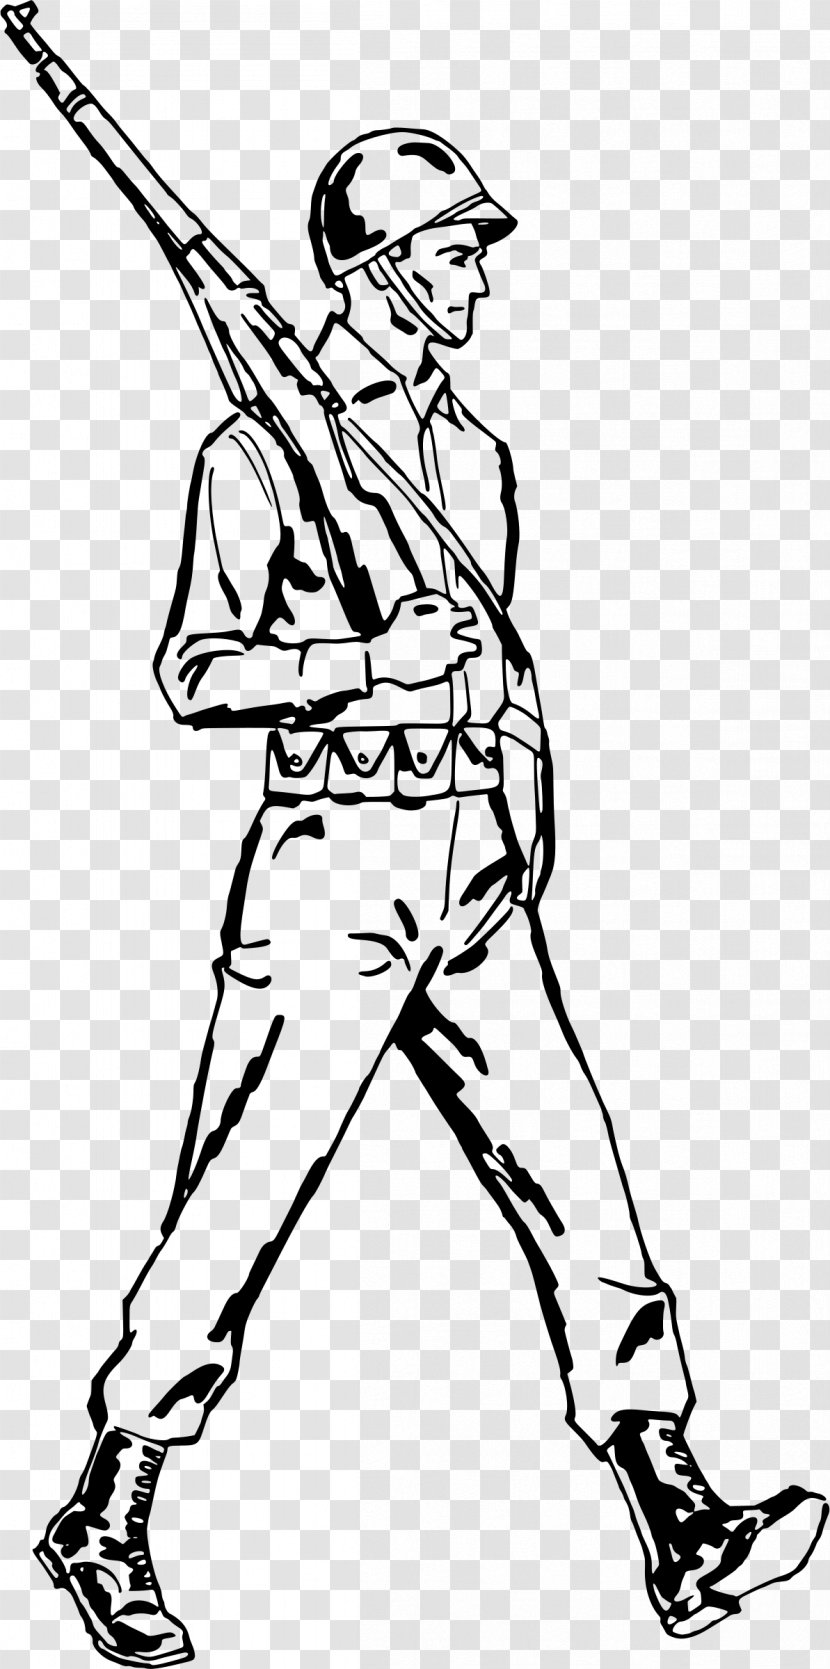 Marching Soldier Clip Art - White Transparent PNG